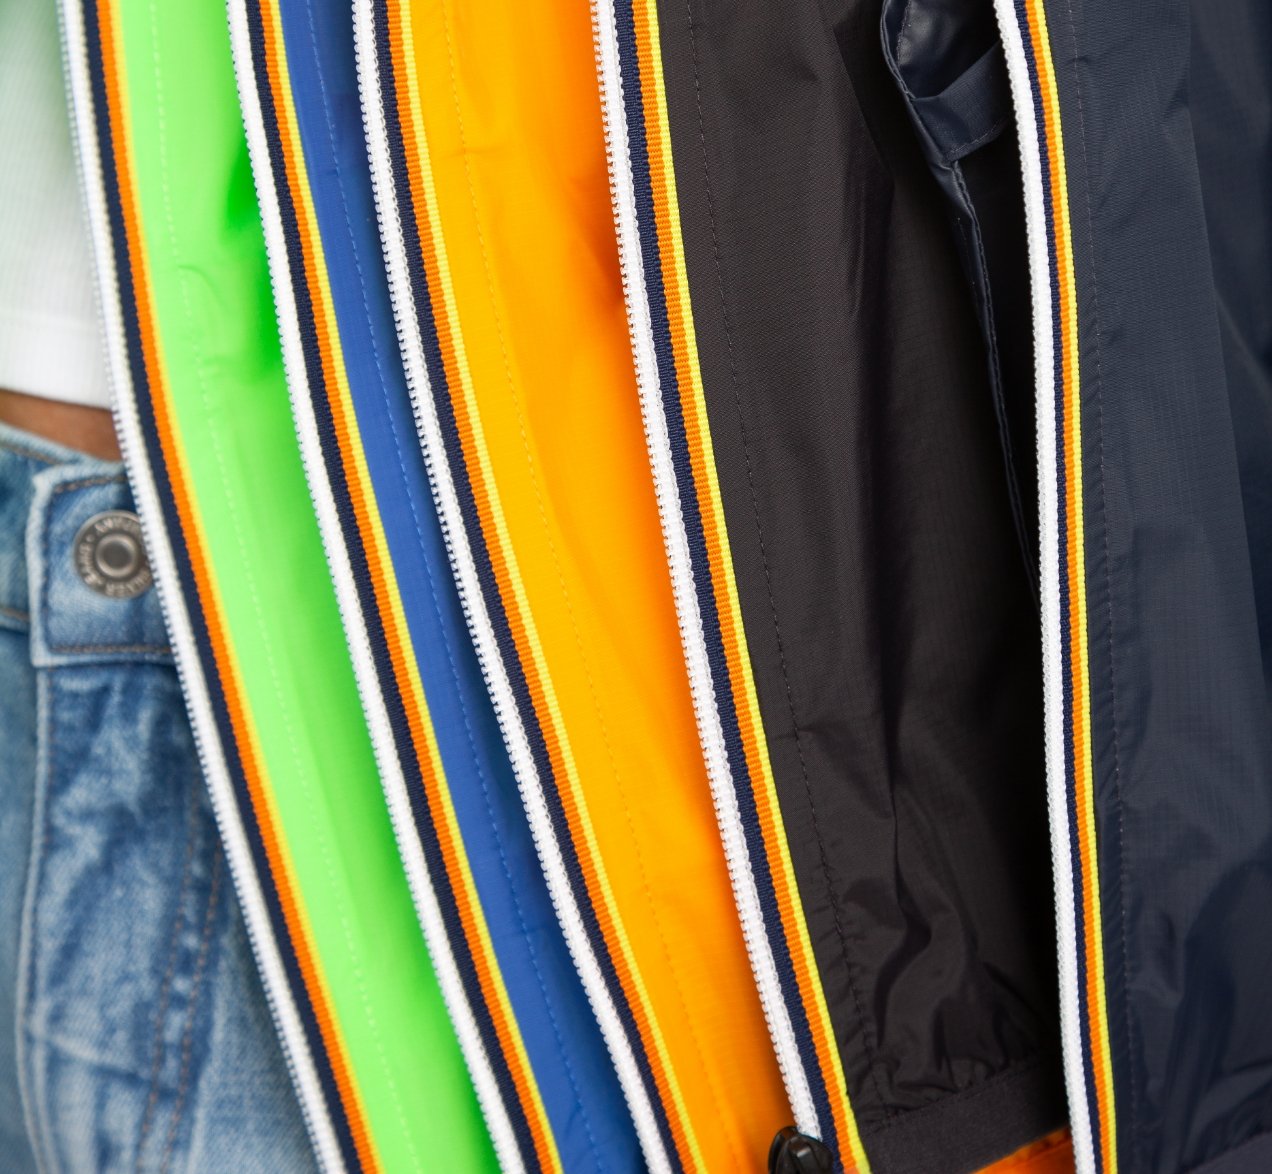 Kway now available at bootlegger